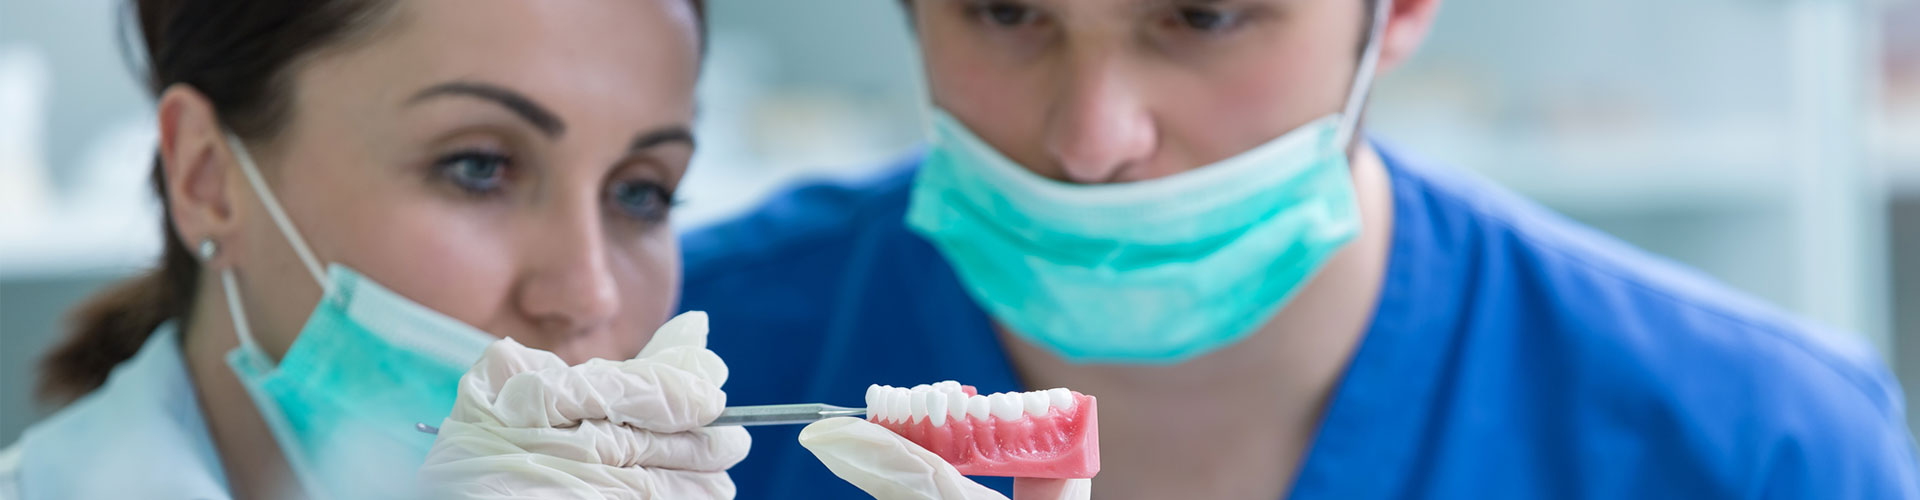 Dental technician working on denture - Dentist in West Chester PA